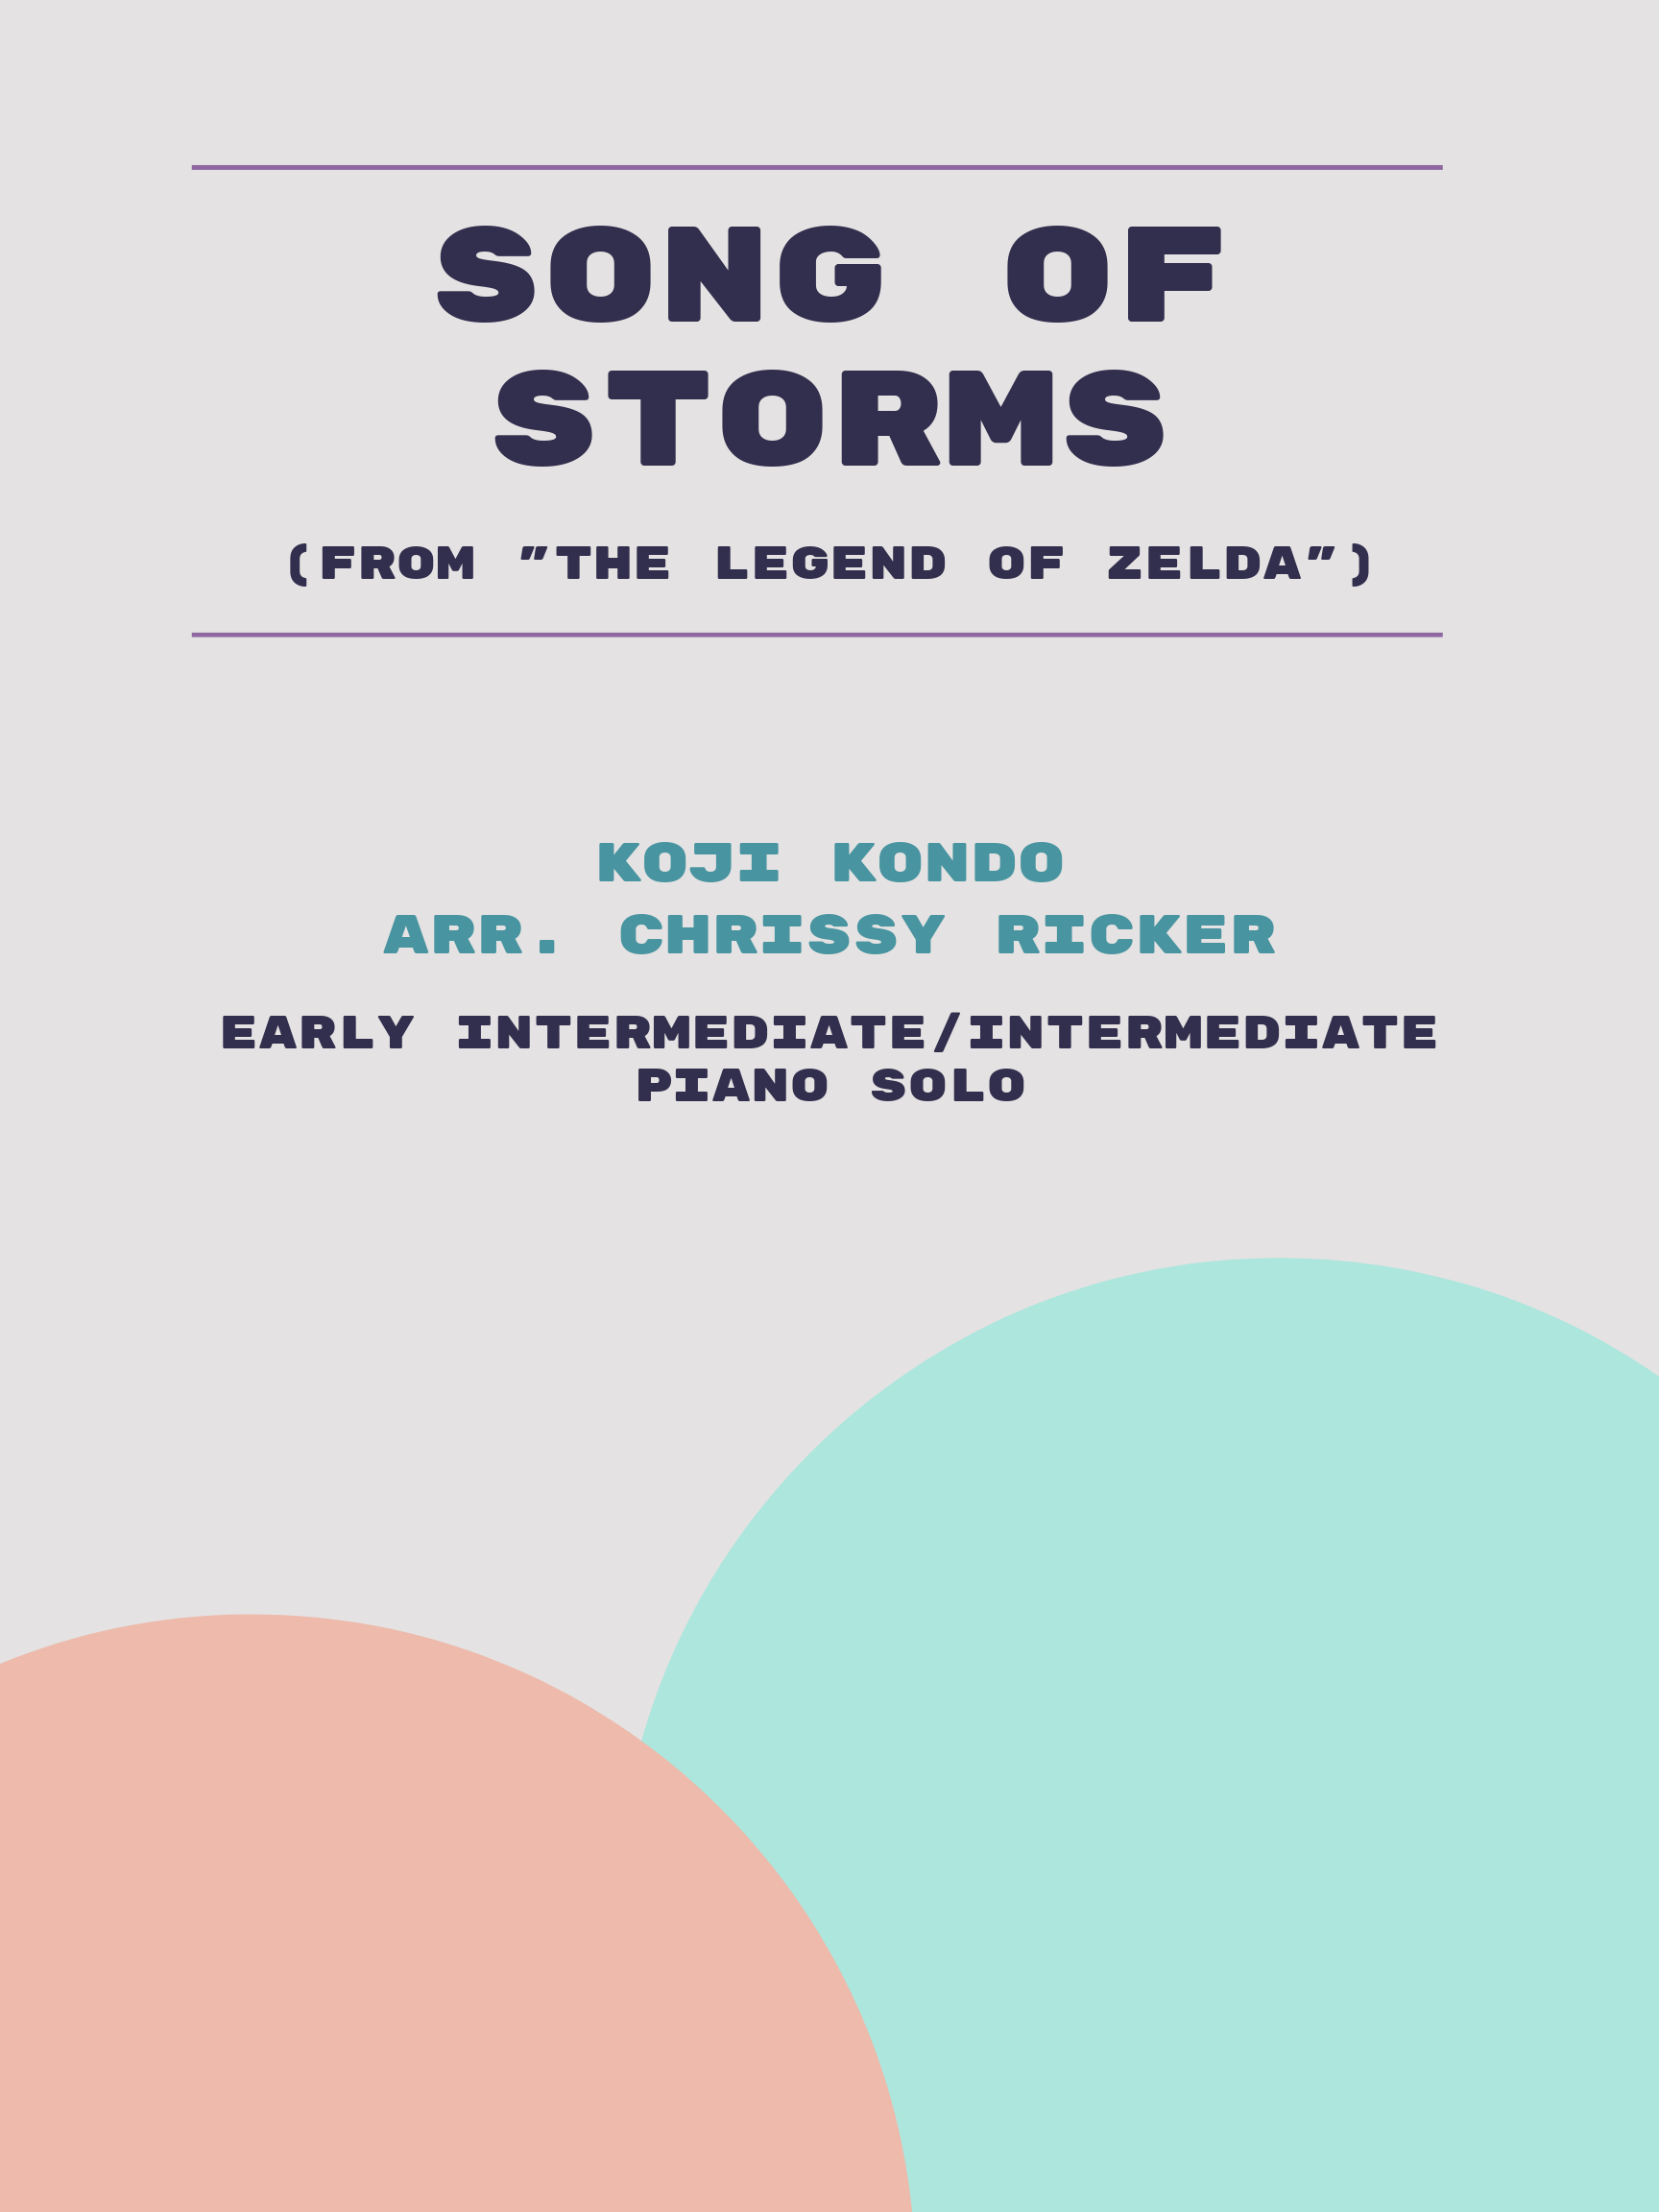 Song of Storms by Koji Kondo